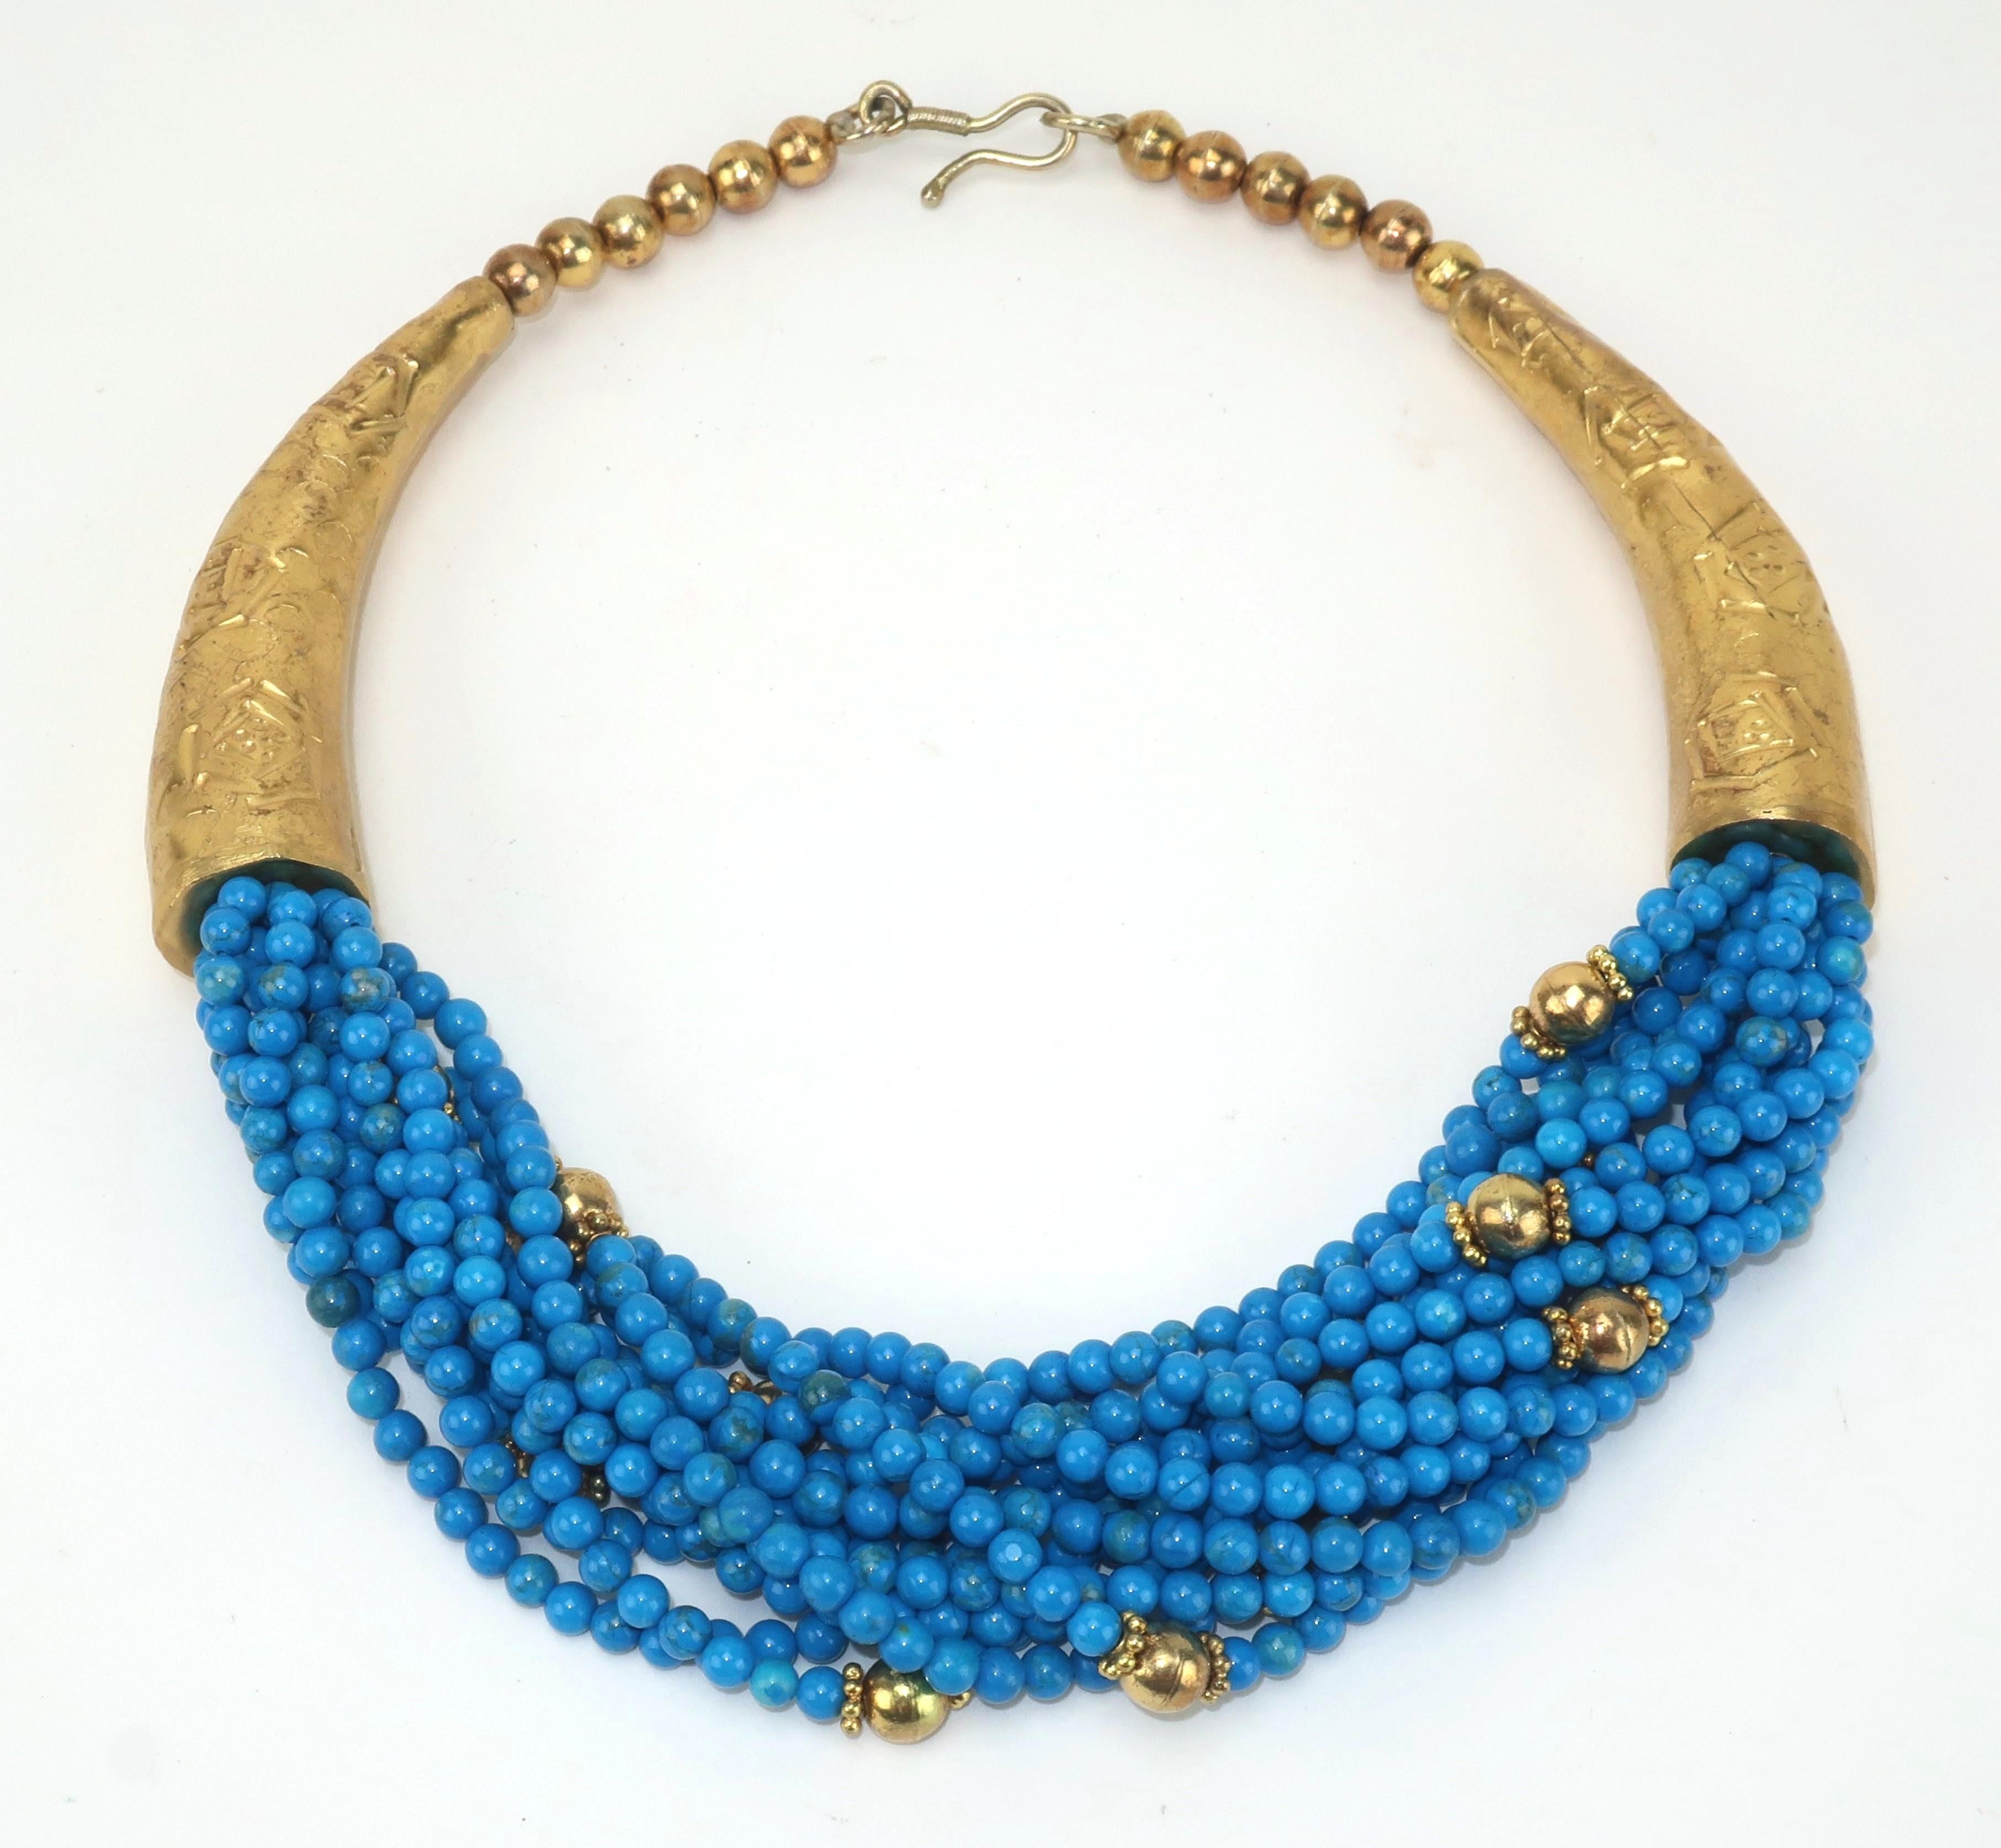 Vintage multi-strand collar necklace designed with bright blue beads and gold tone metal accents.  Outfitted with a J-hook and unsigned.  The former owner purchased this lovely piece in Egypt and indeed it has a wonderful North African aesthetic. 